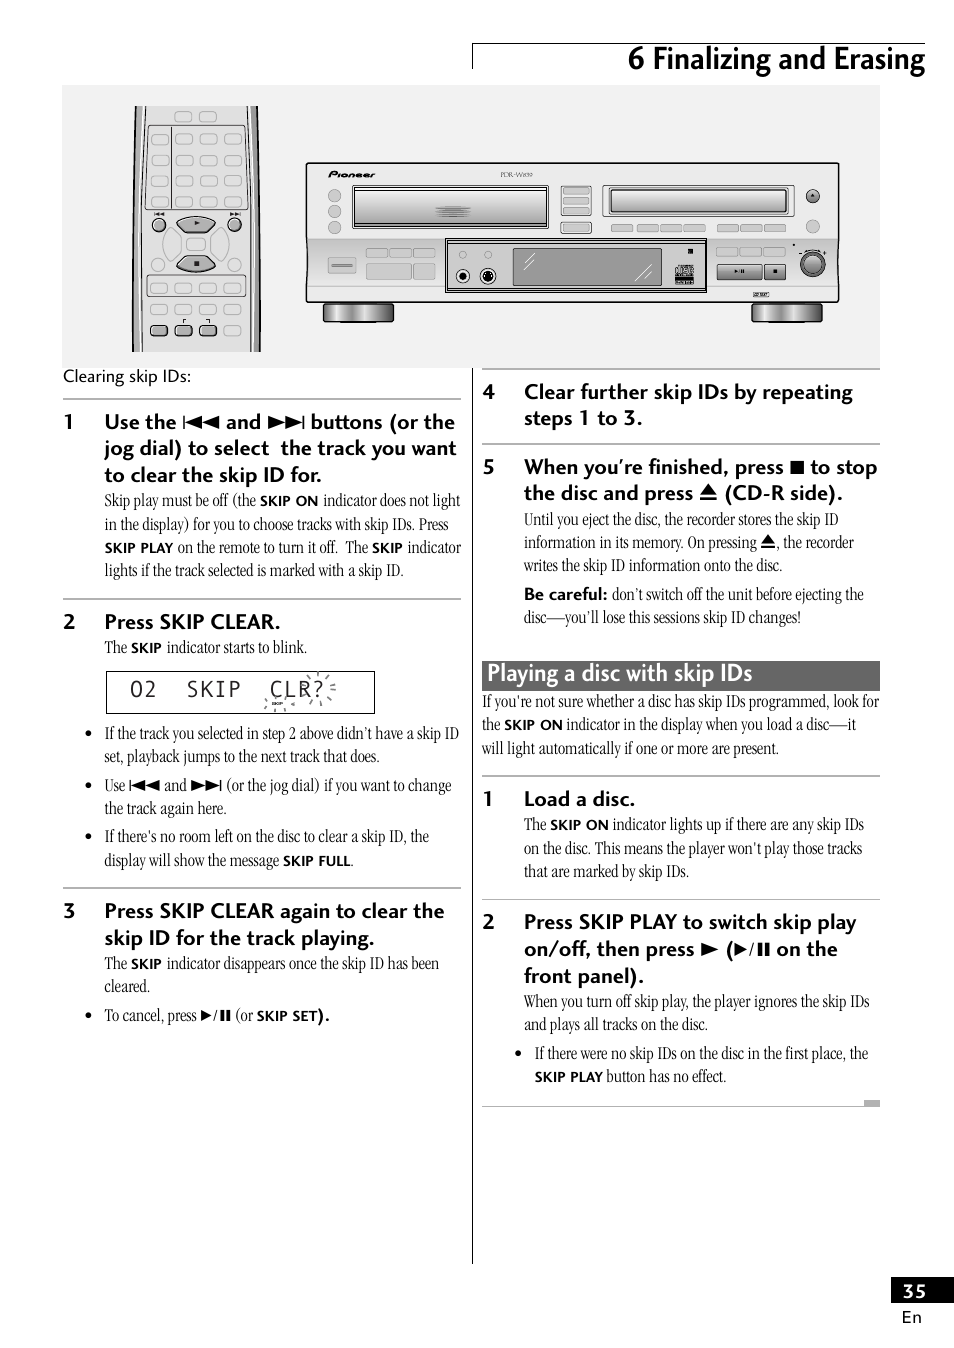 Playing a disc with skip ids, 6 finalizing and erasing, O2 skip clr | 2press skip clear, 1load a disc | Pioneer PDR-W839 User Manual | Page 35 / 52